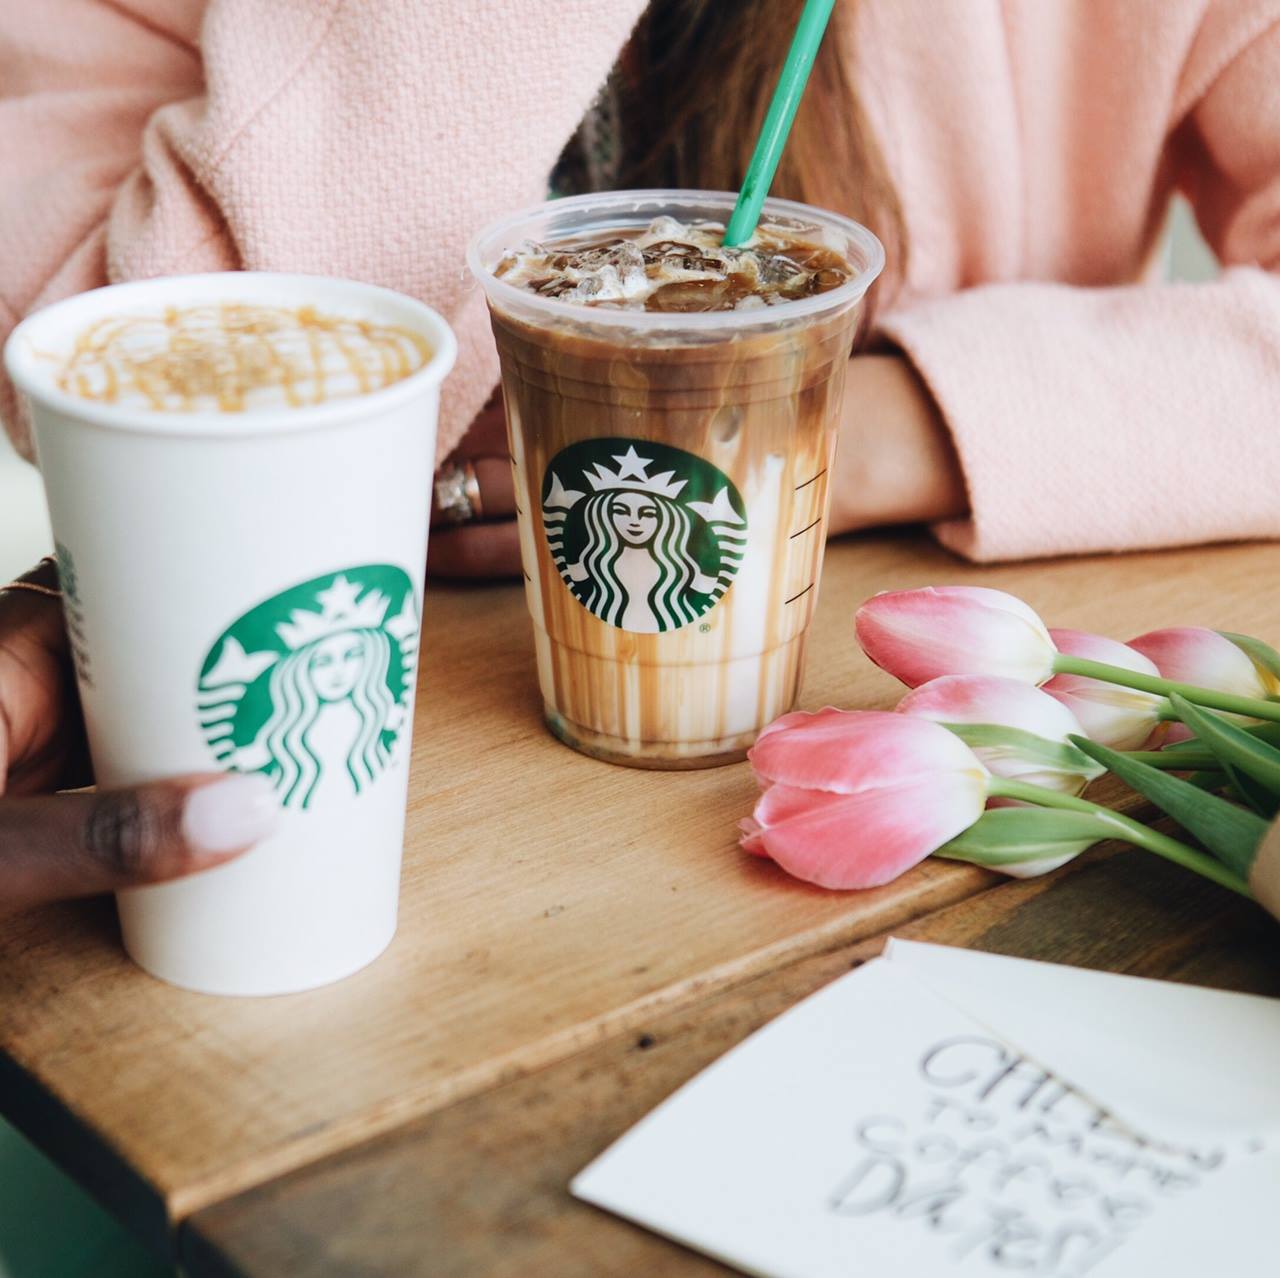 Starbucks: Save 50% on any macchiato with mobile coupon